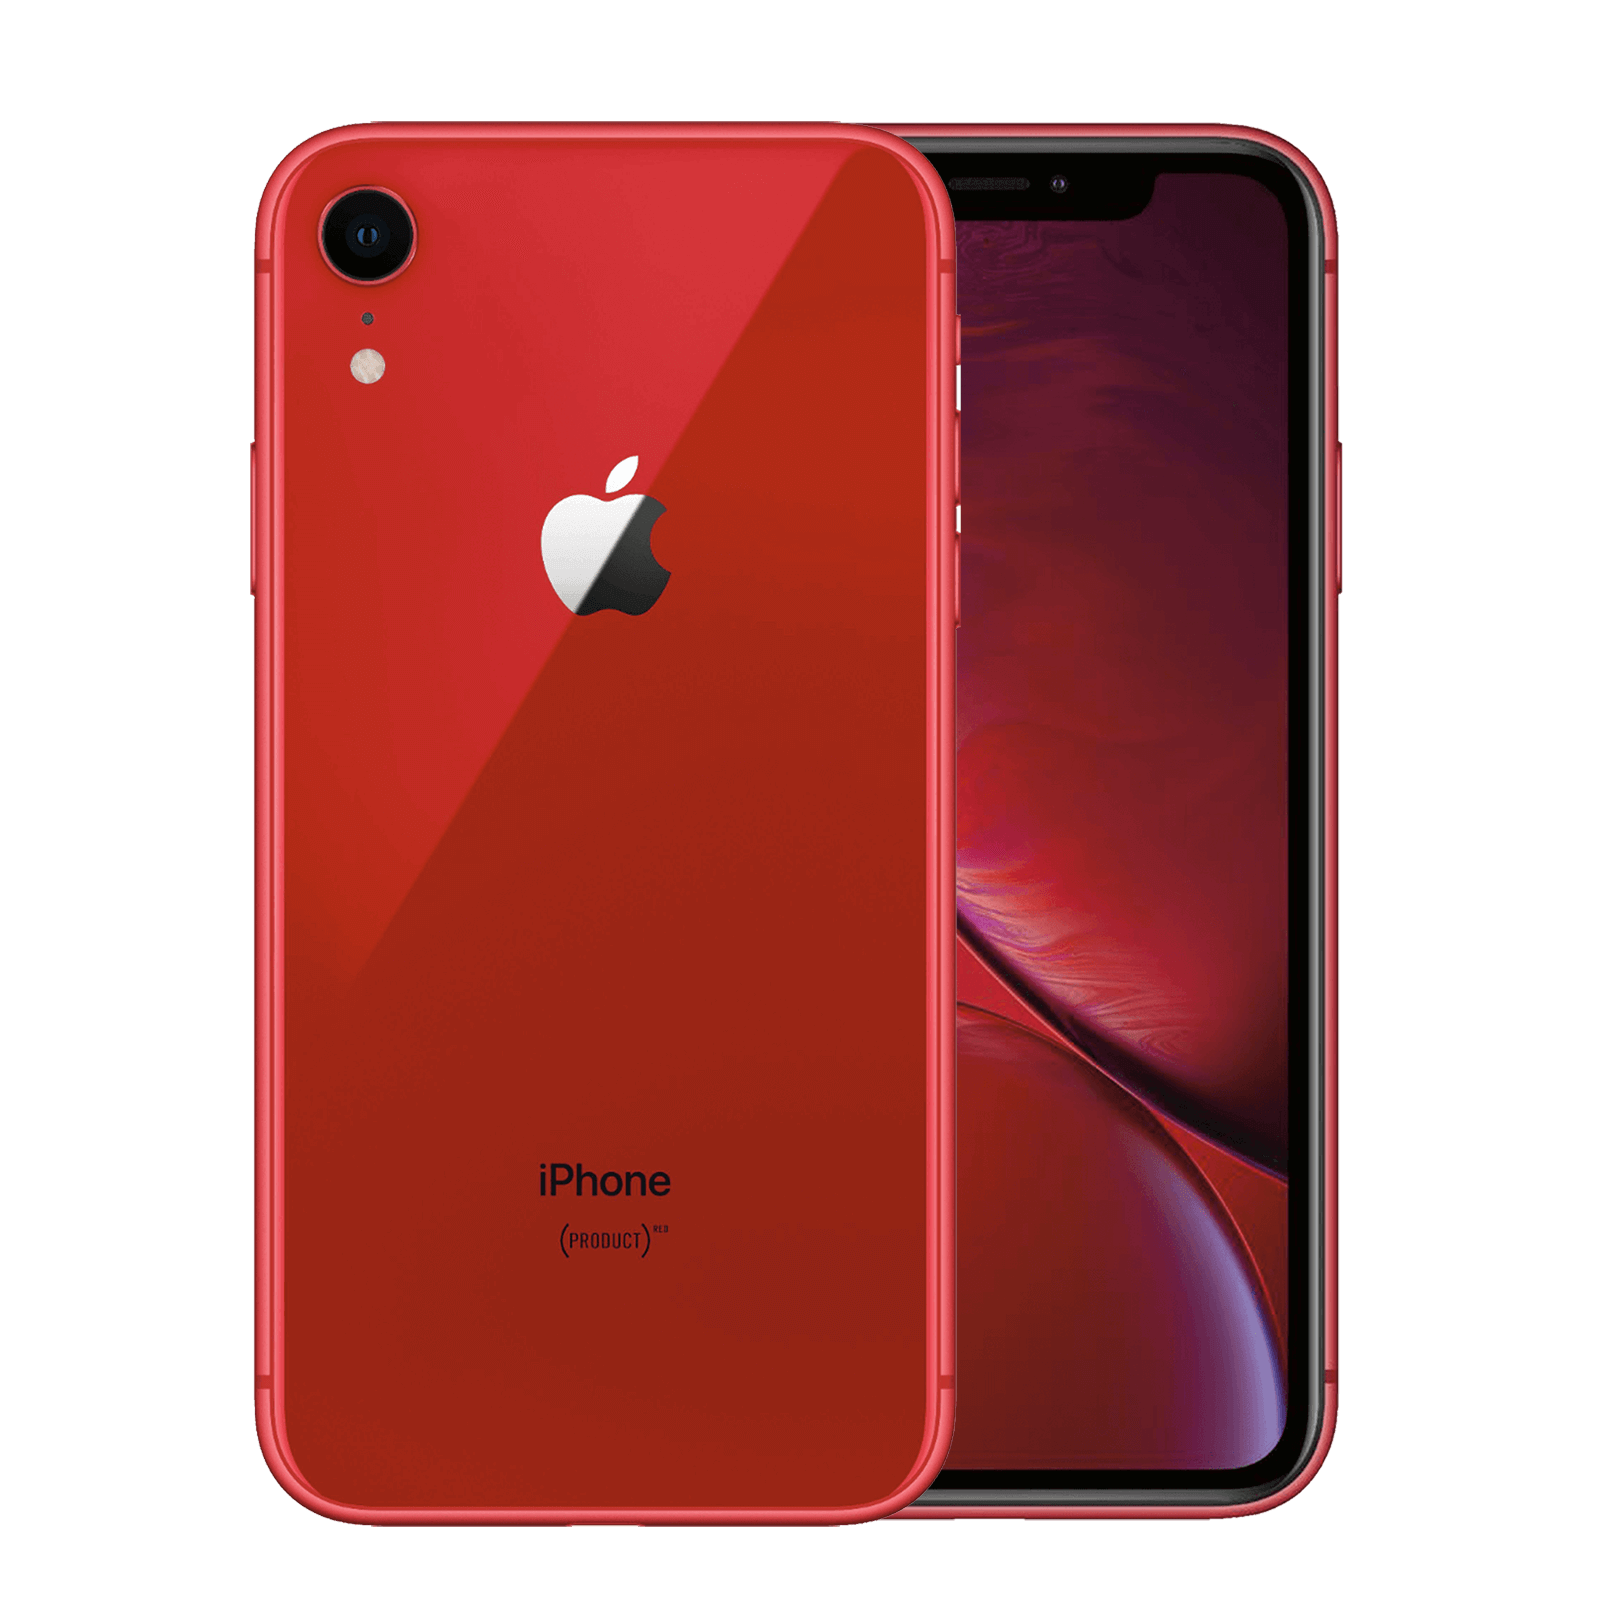 Apple iPhone XR 64GB Product Red Very Good - Unlocked